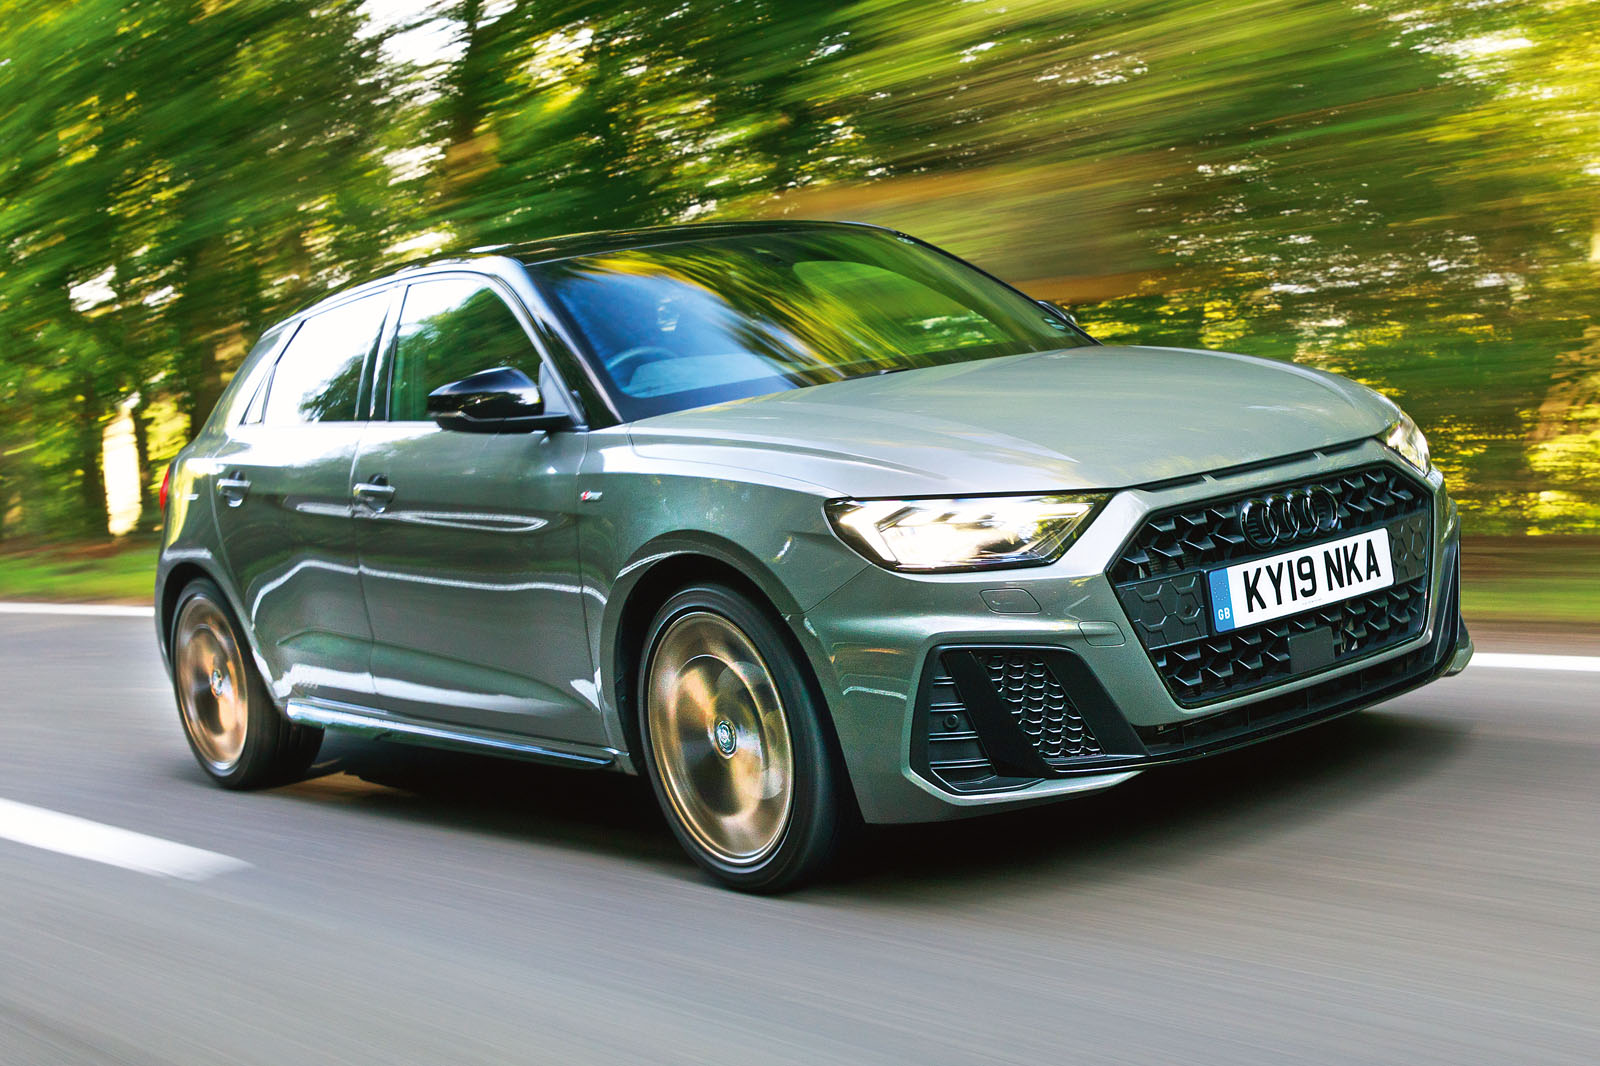 Audi S1 Quattro review - prices, specs and 0-60 time